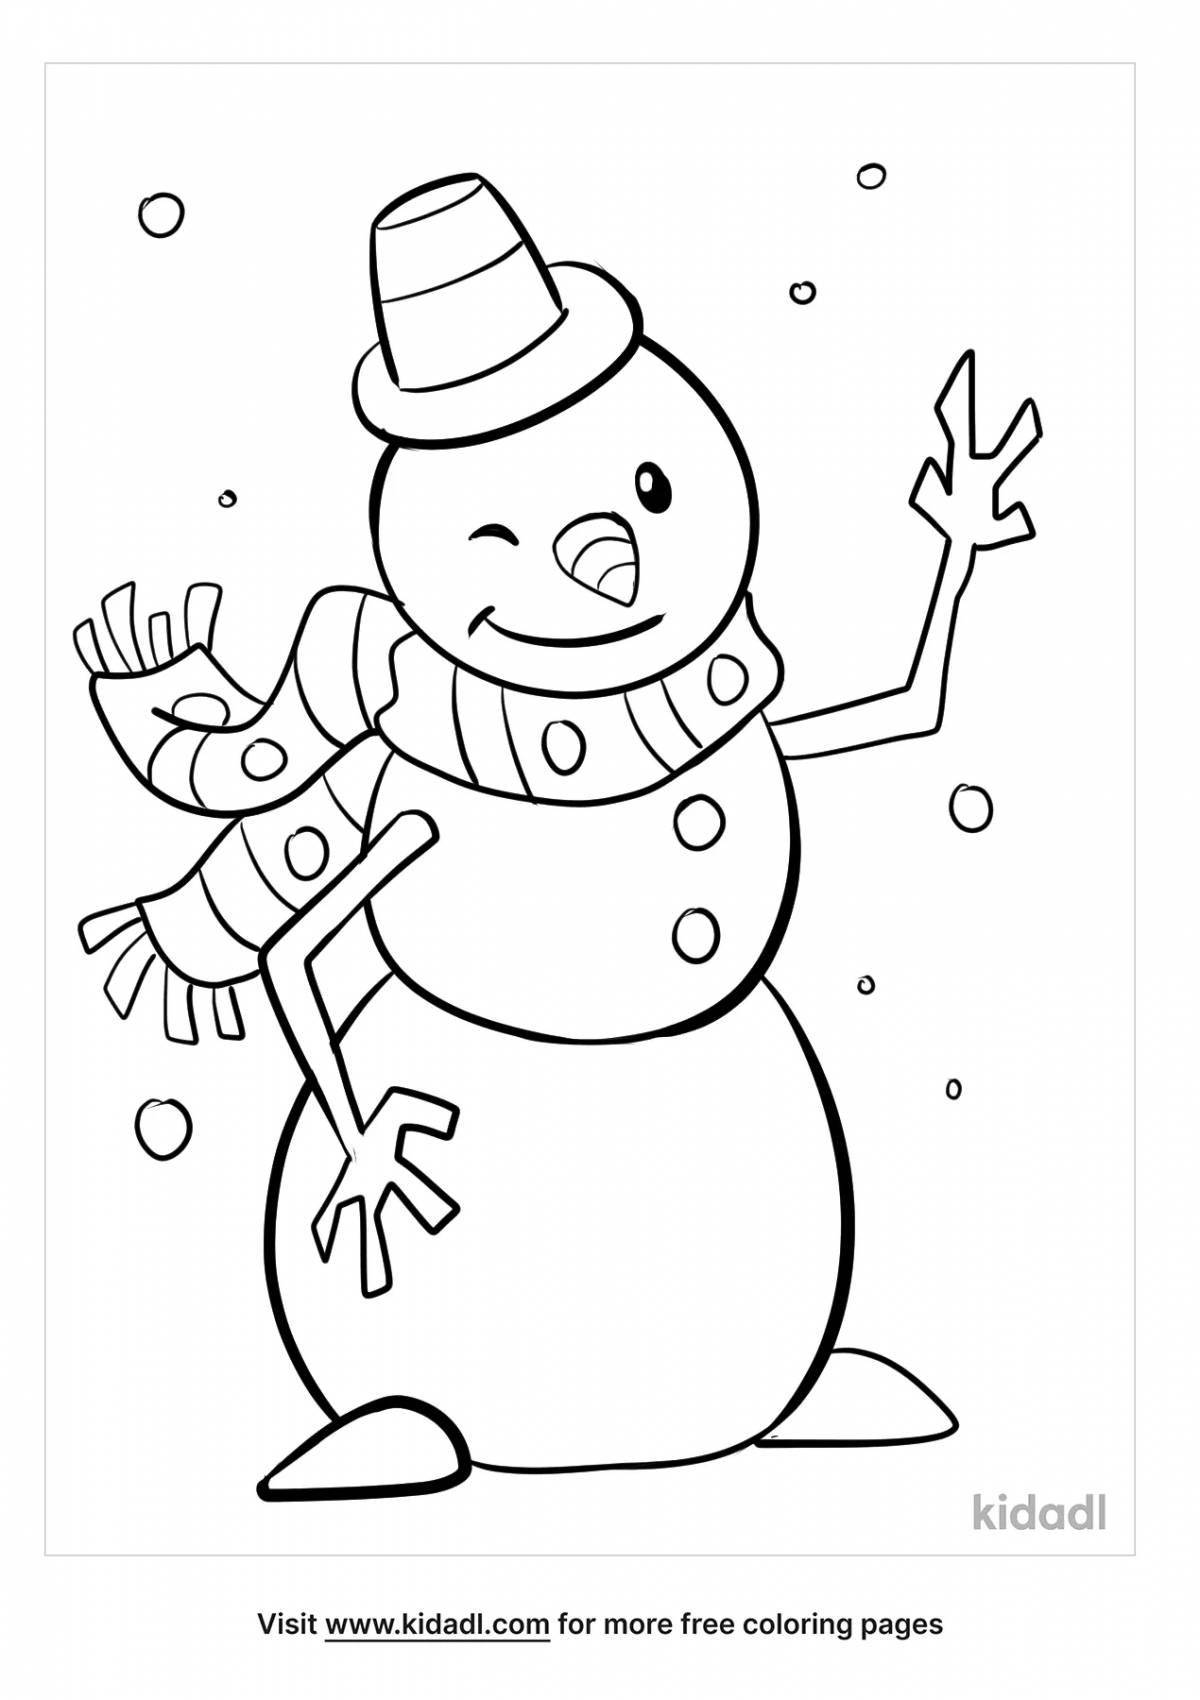 Bright coloring snowman for kids 5 6